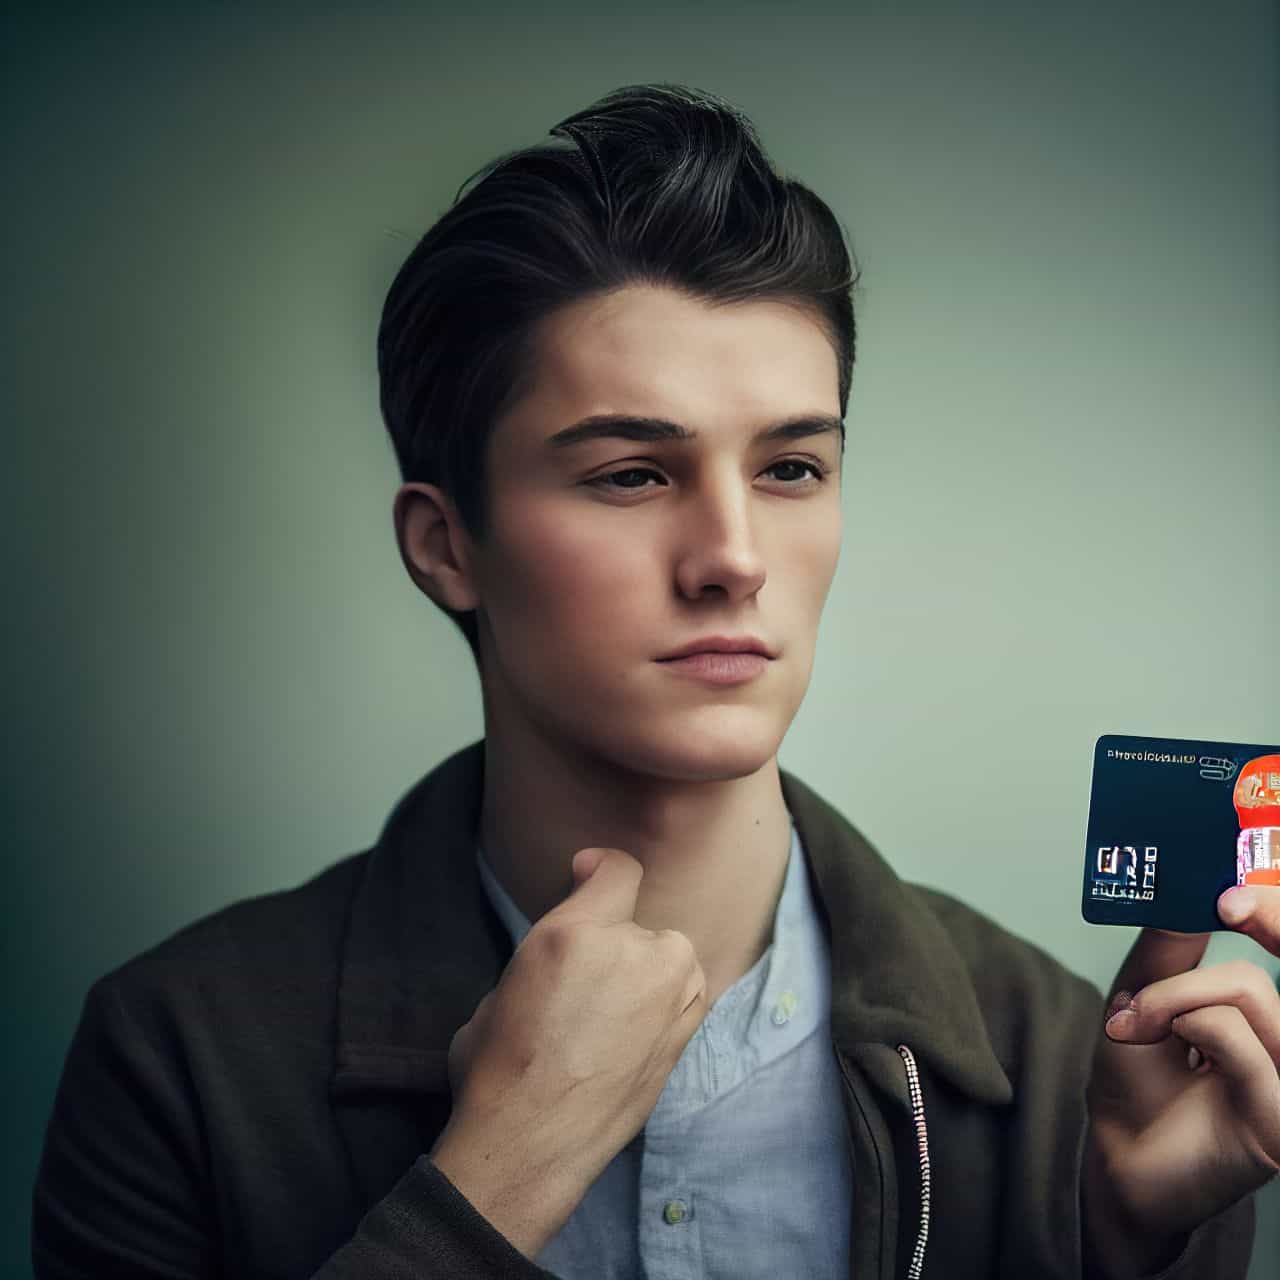 young man holding a credit card